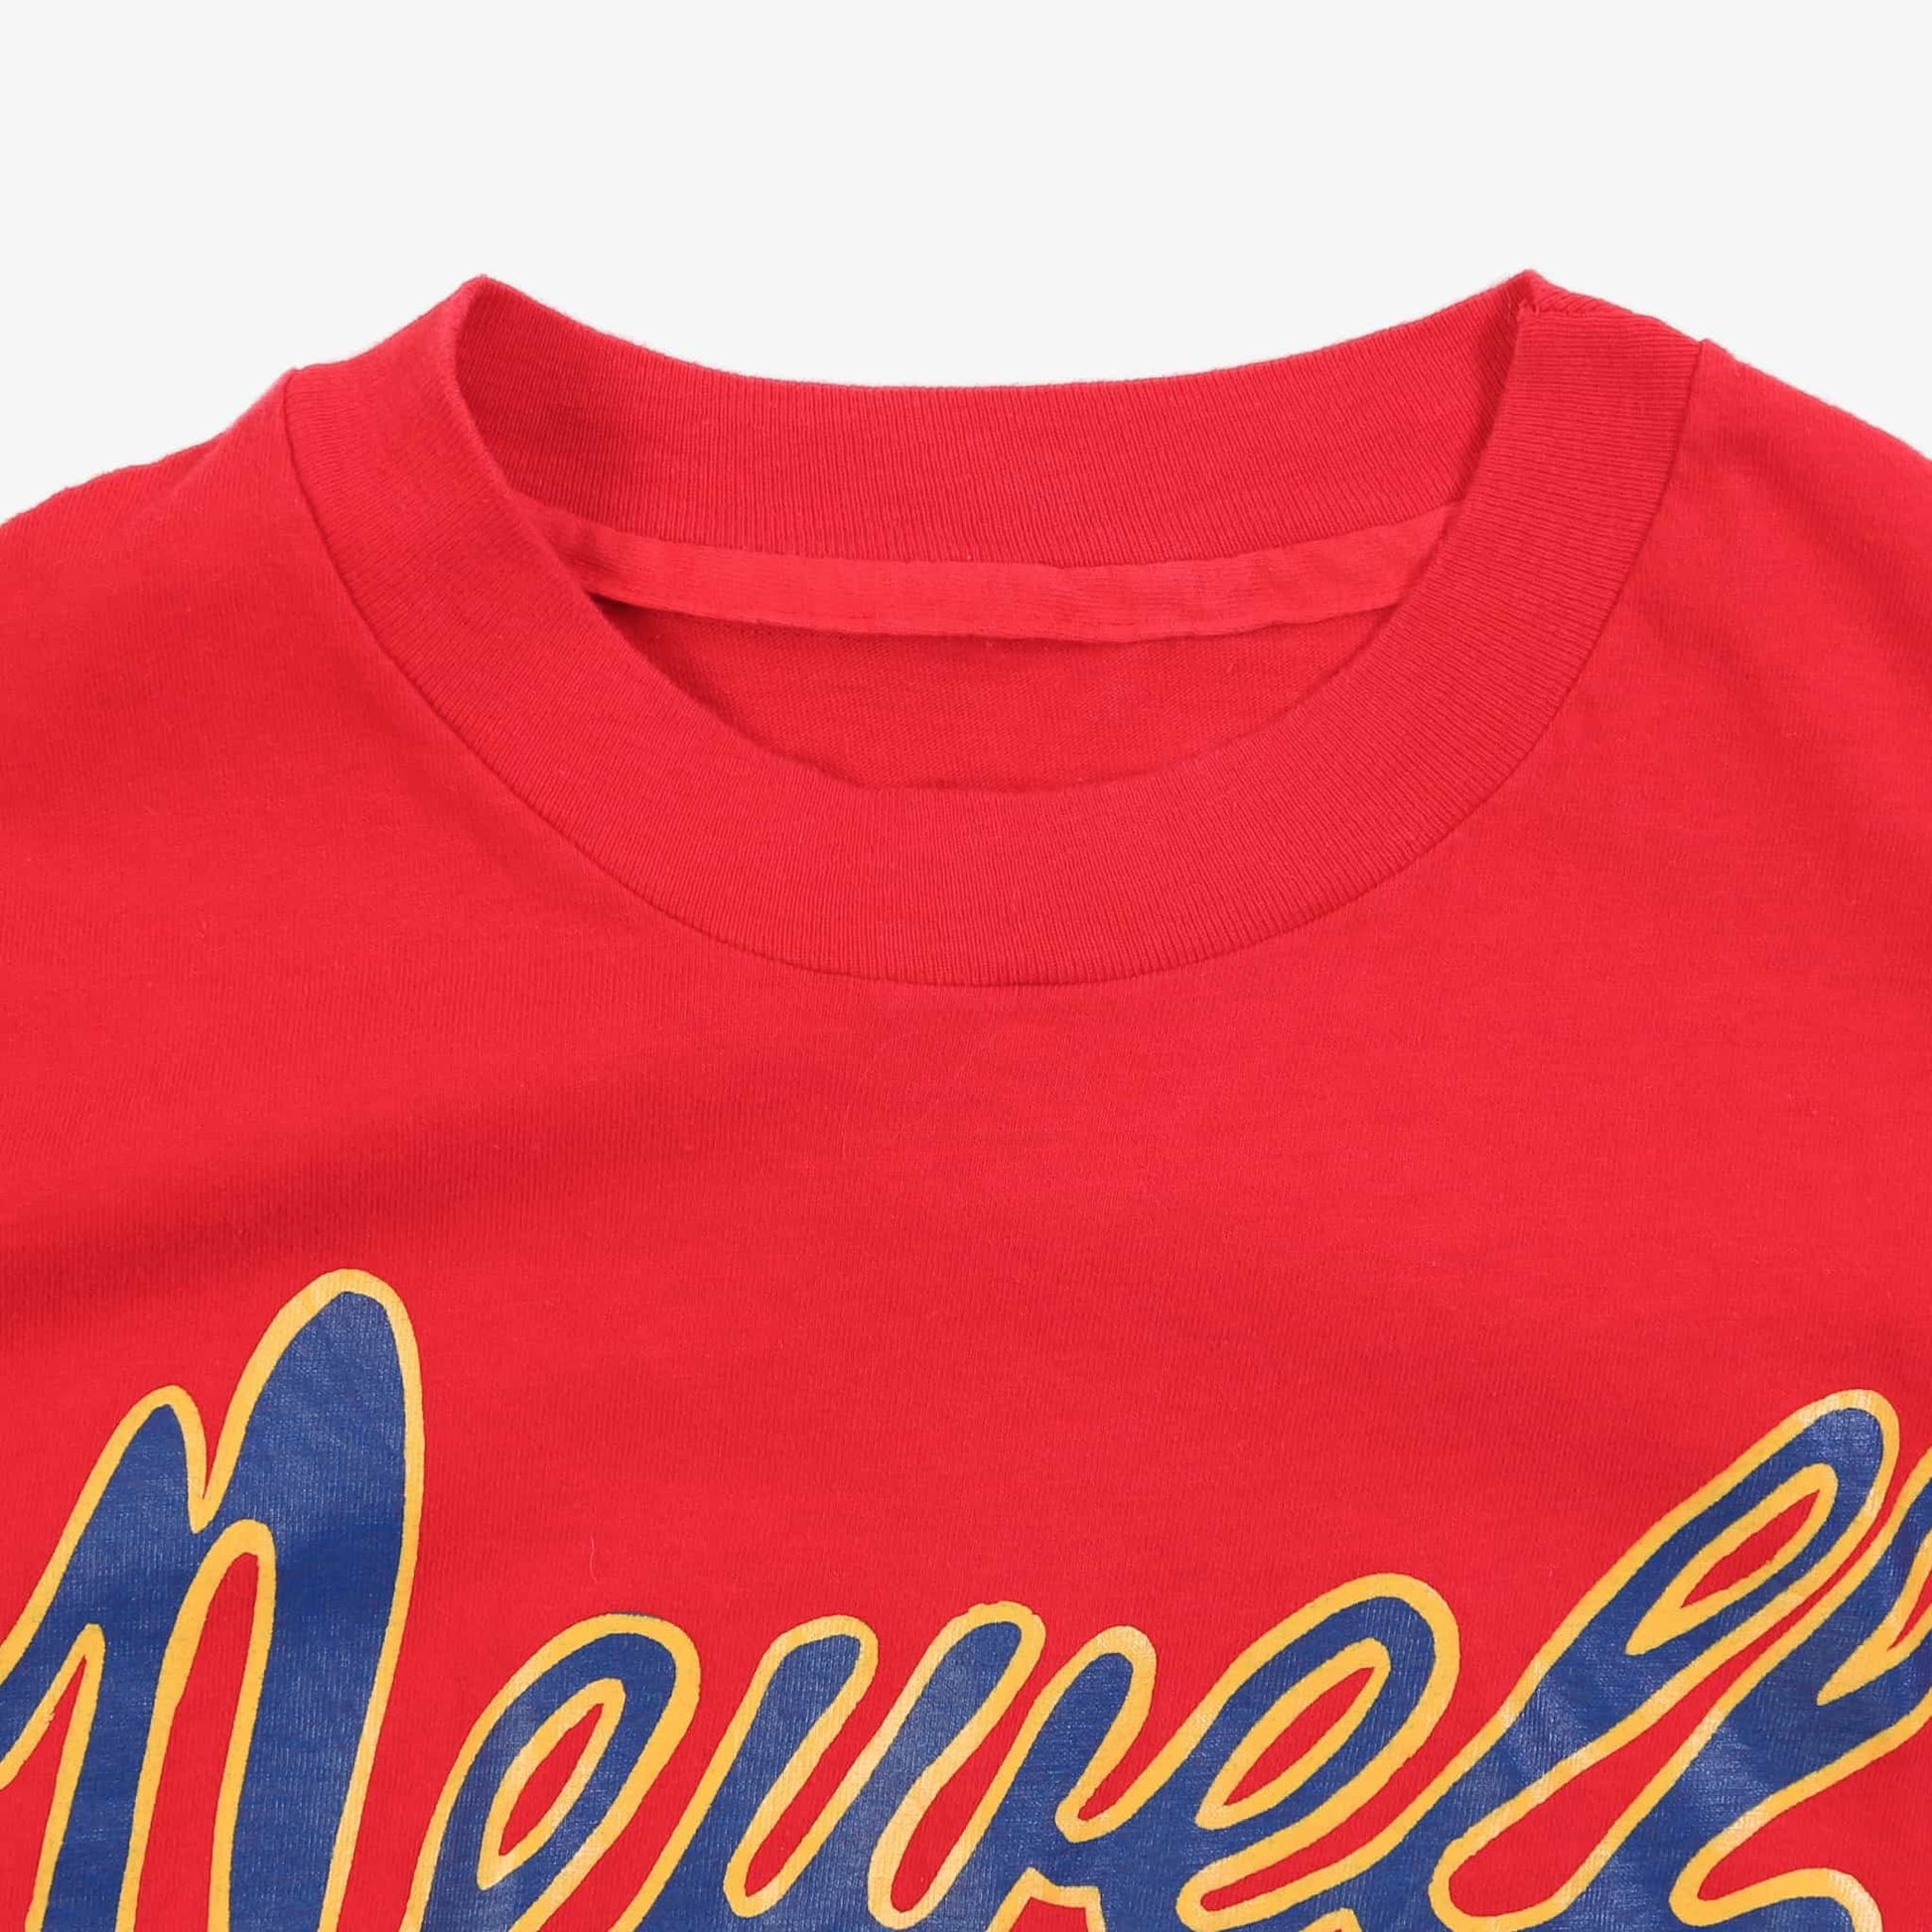 Vintage "Newell Concrete" T-Shirt - American Madness